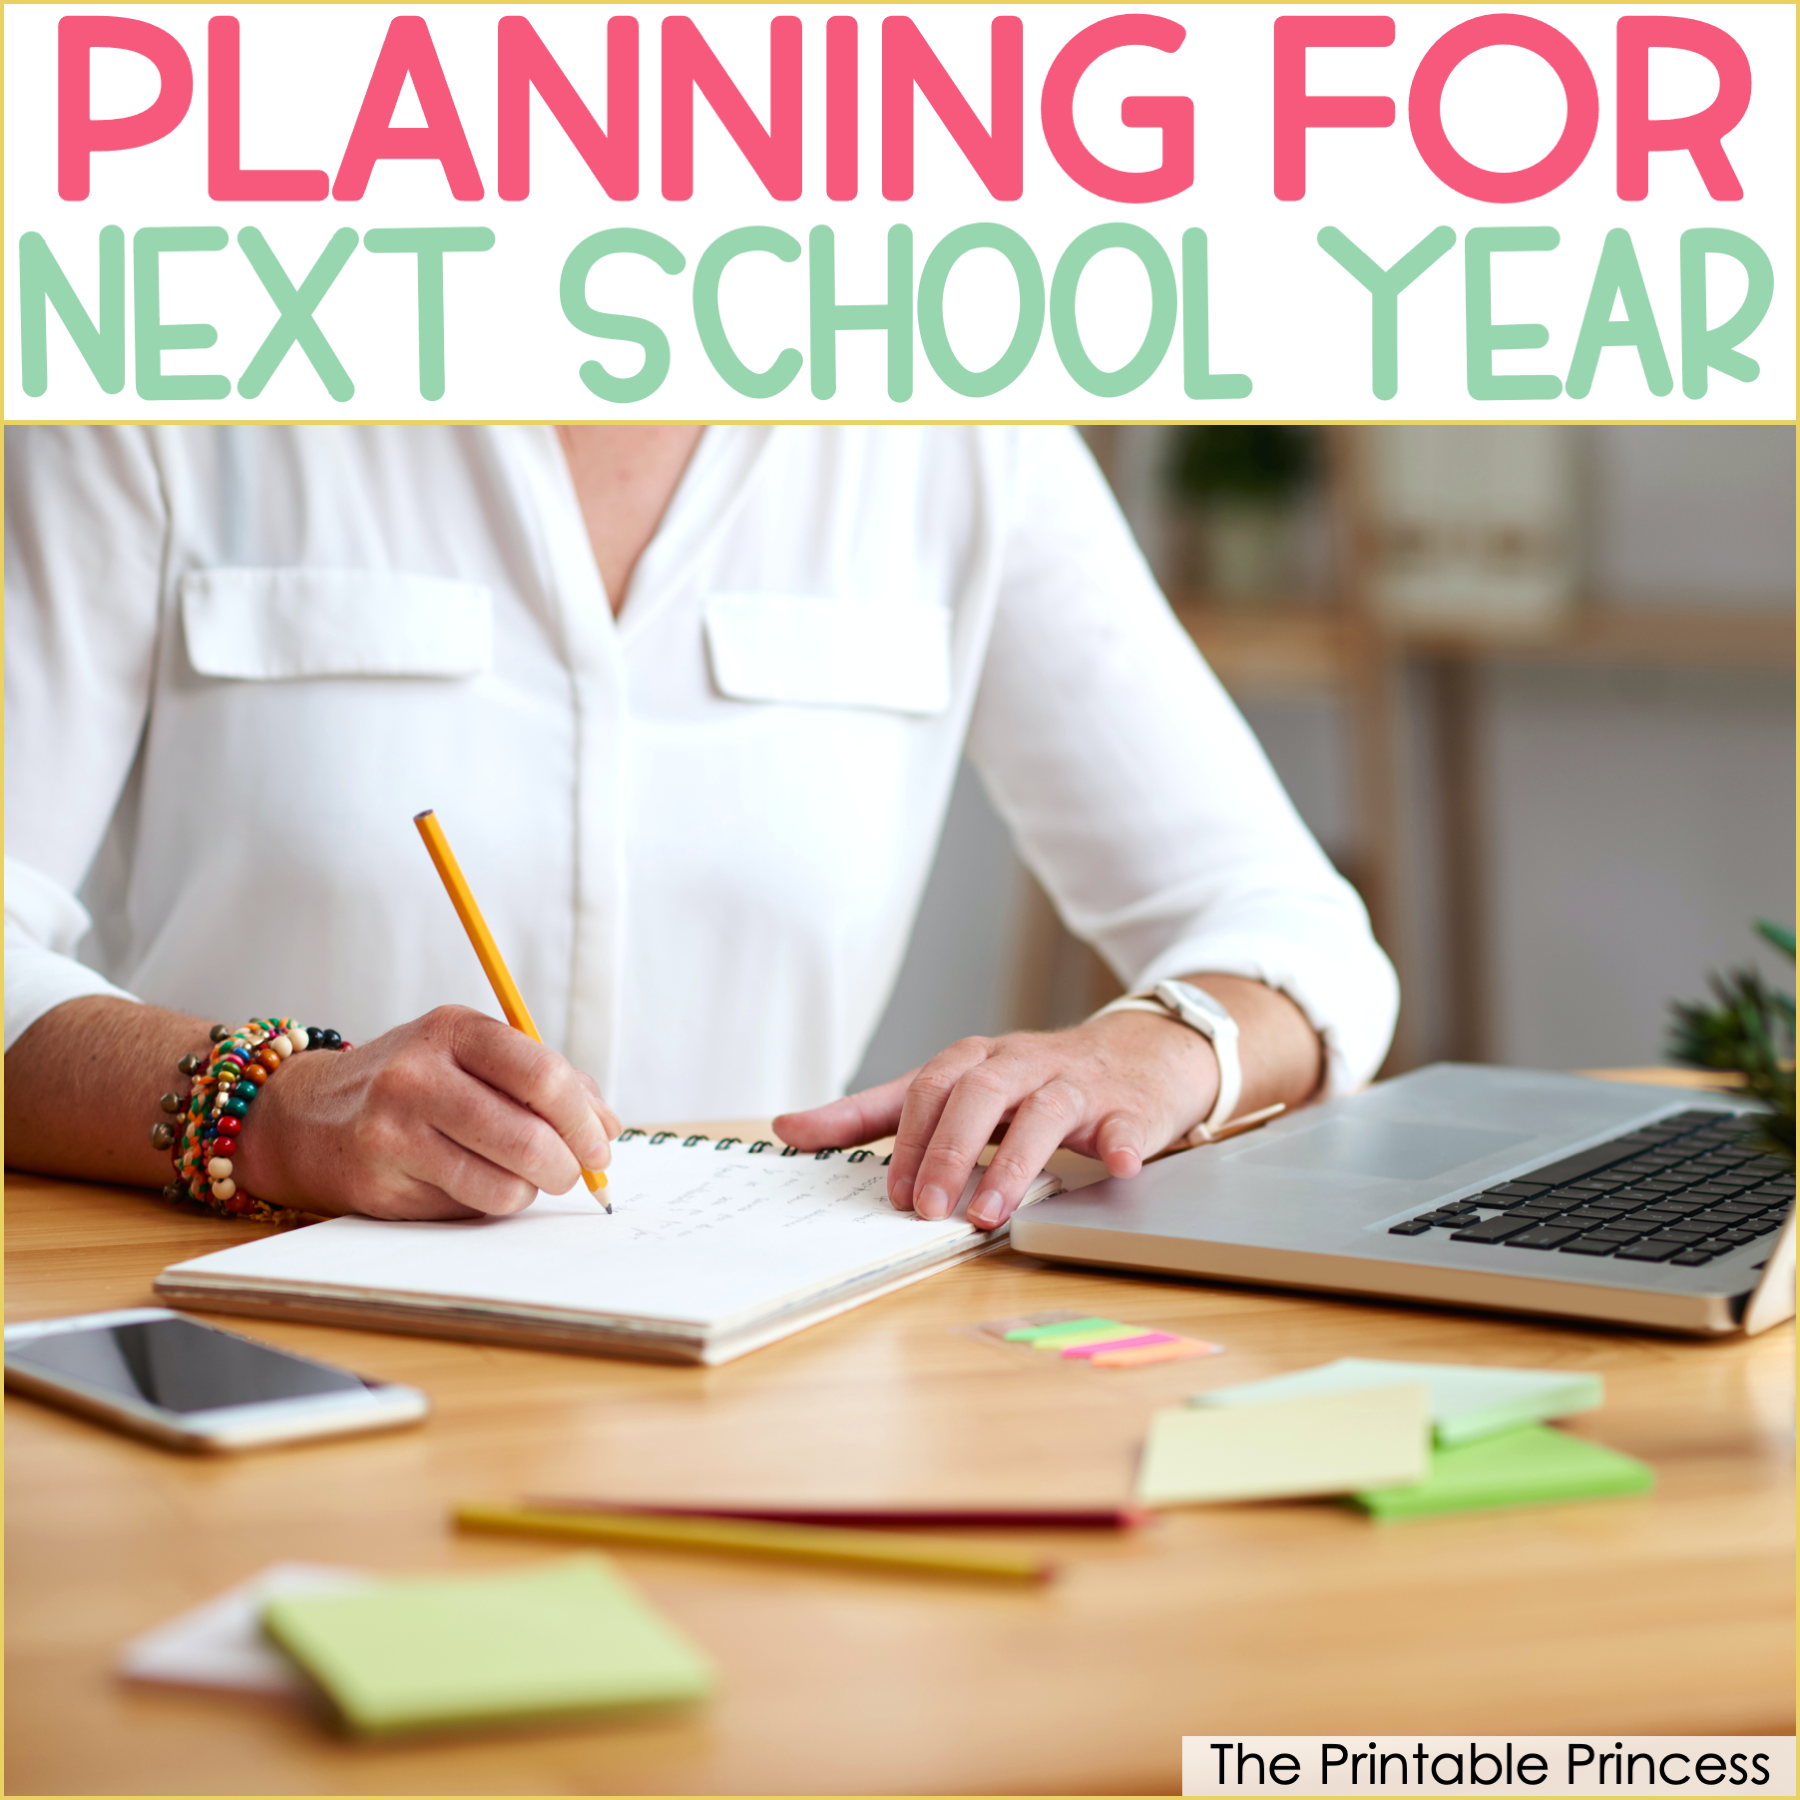 4 Tips for Planning Ahead for Next School Year